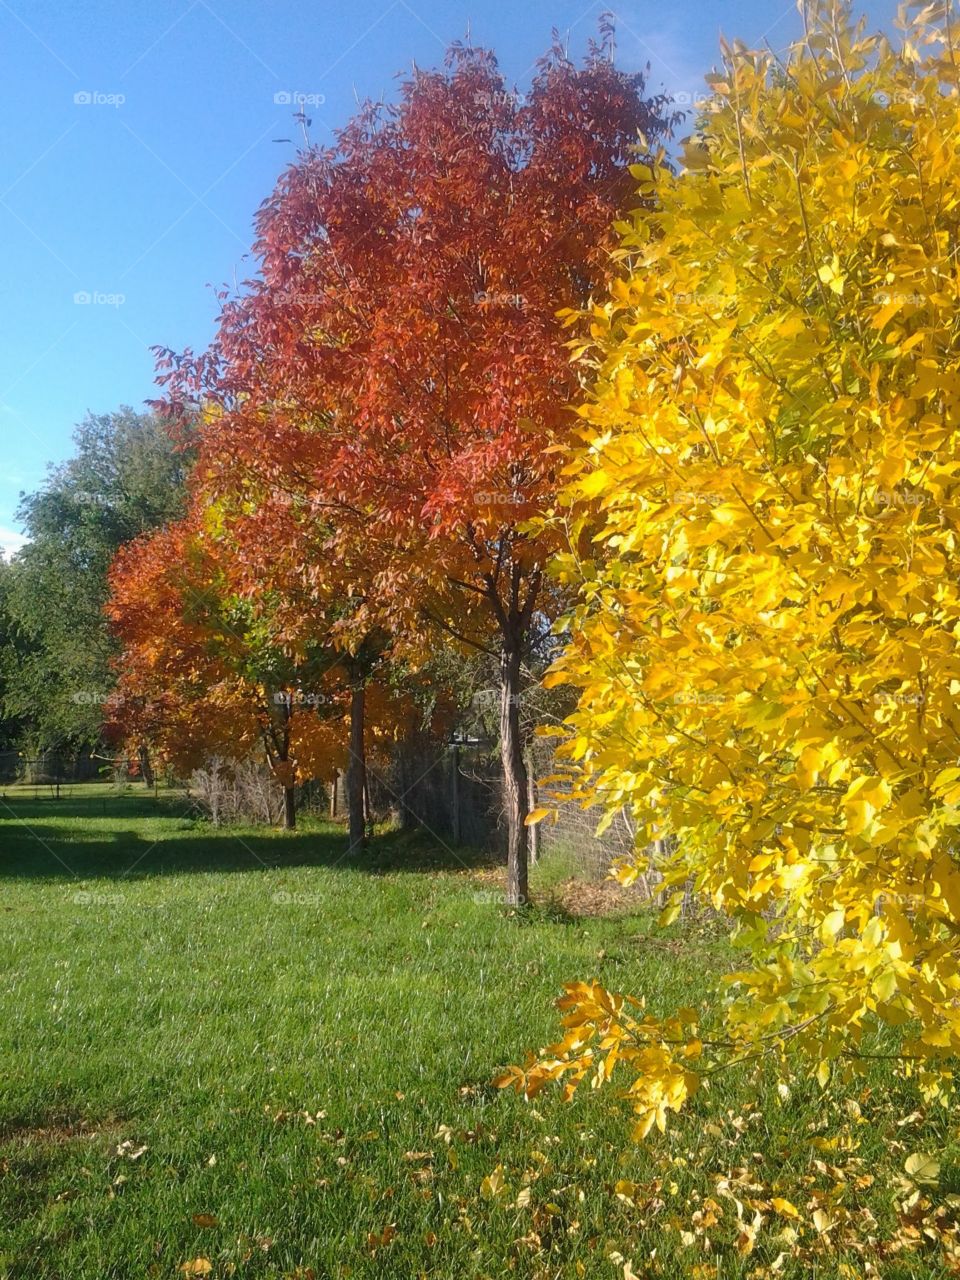 Beauty of Autumn. Autumn colors in our own backyard.